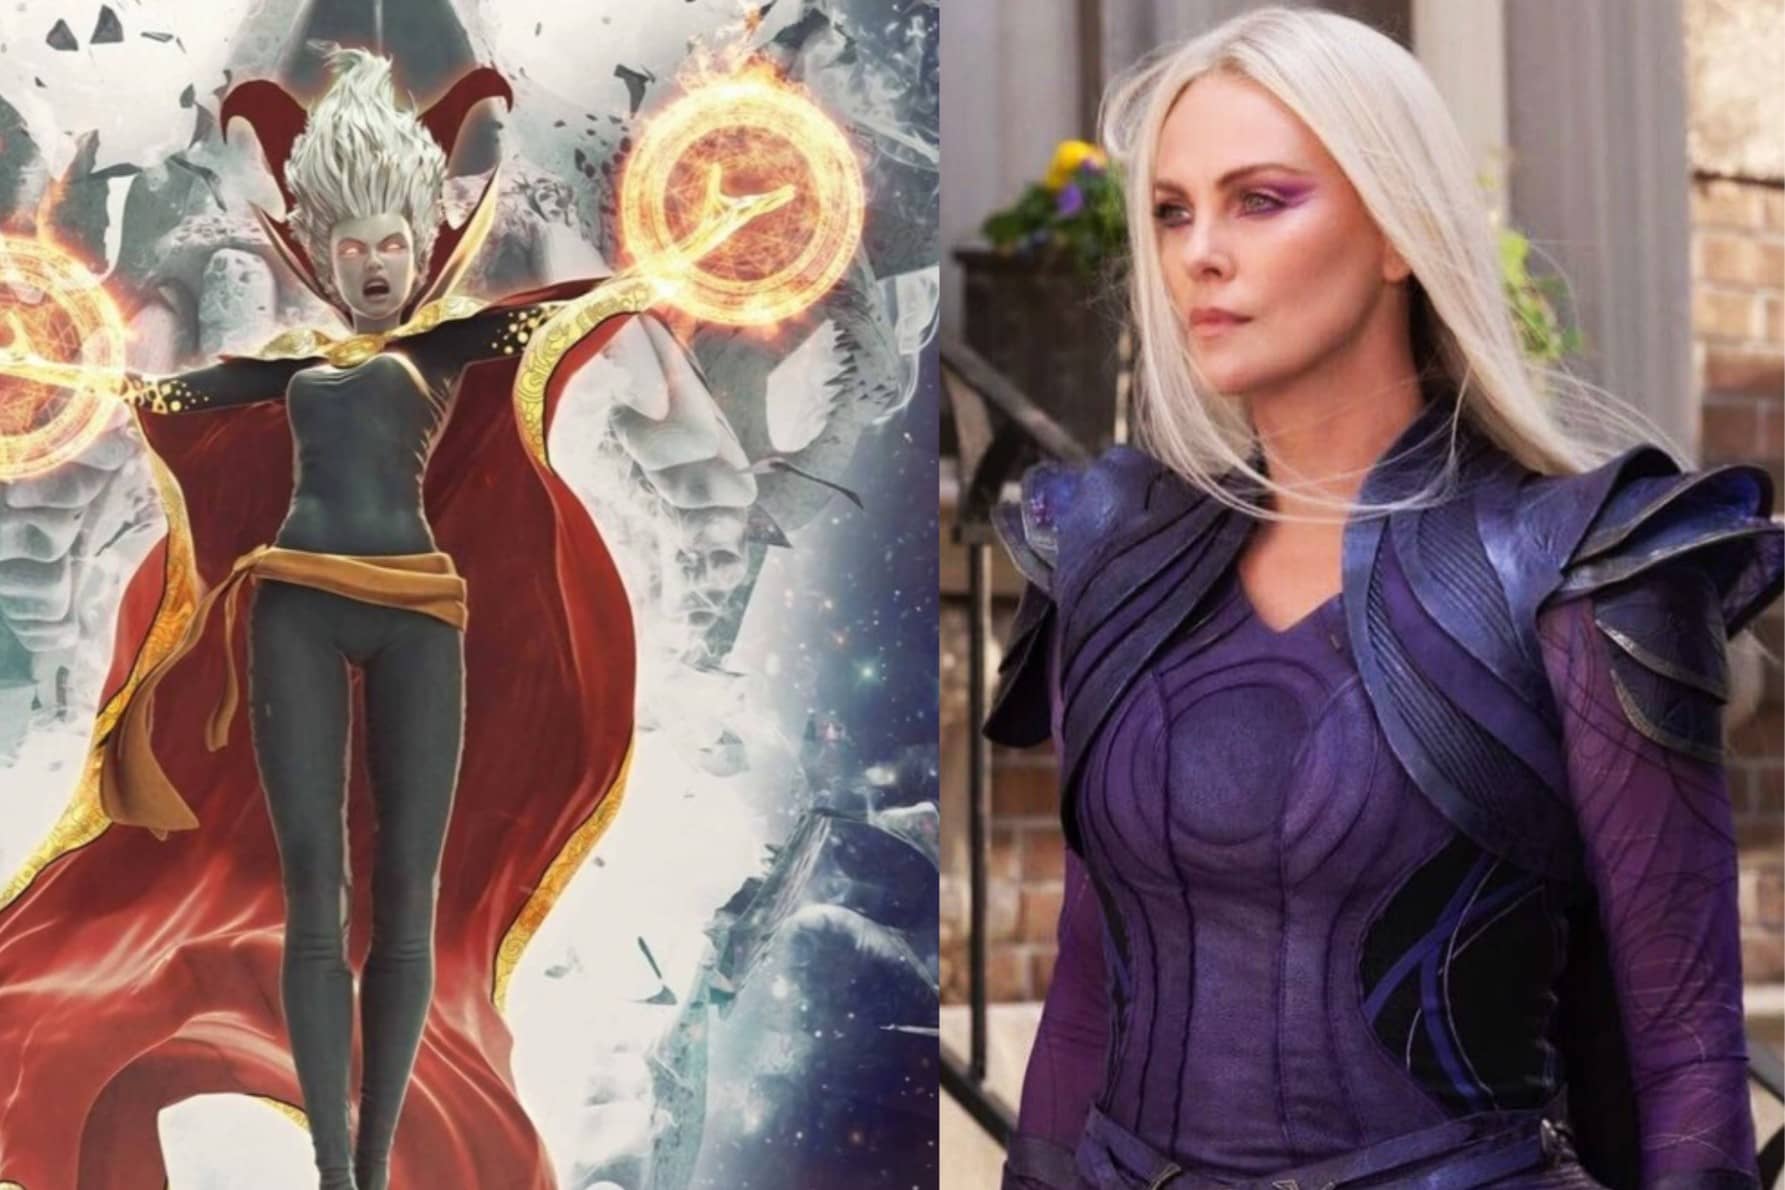 Who Is Clea In Marvel Comics? Charlize Theron’s MCU Clea Explained